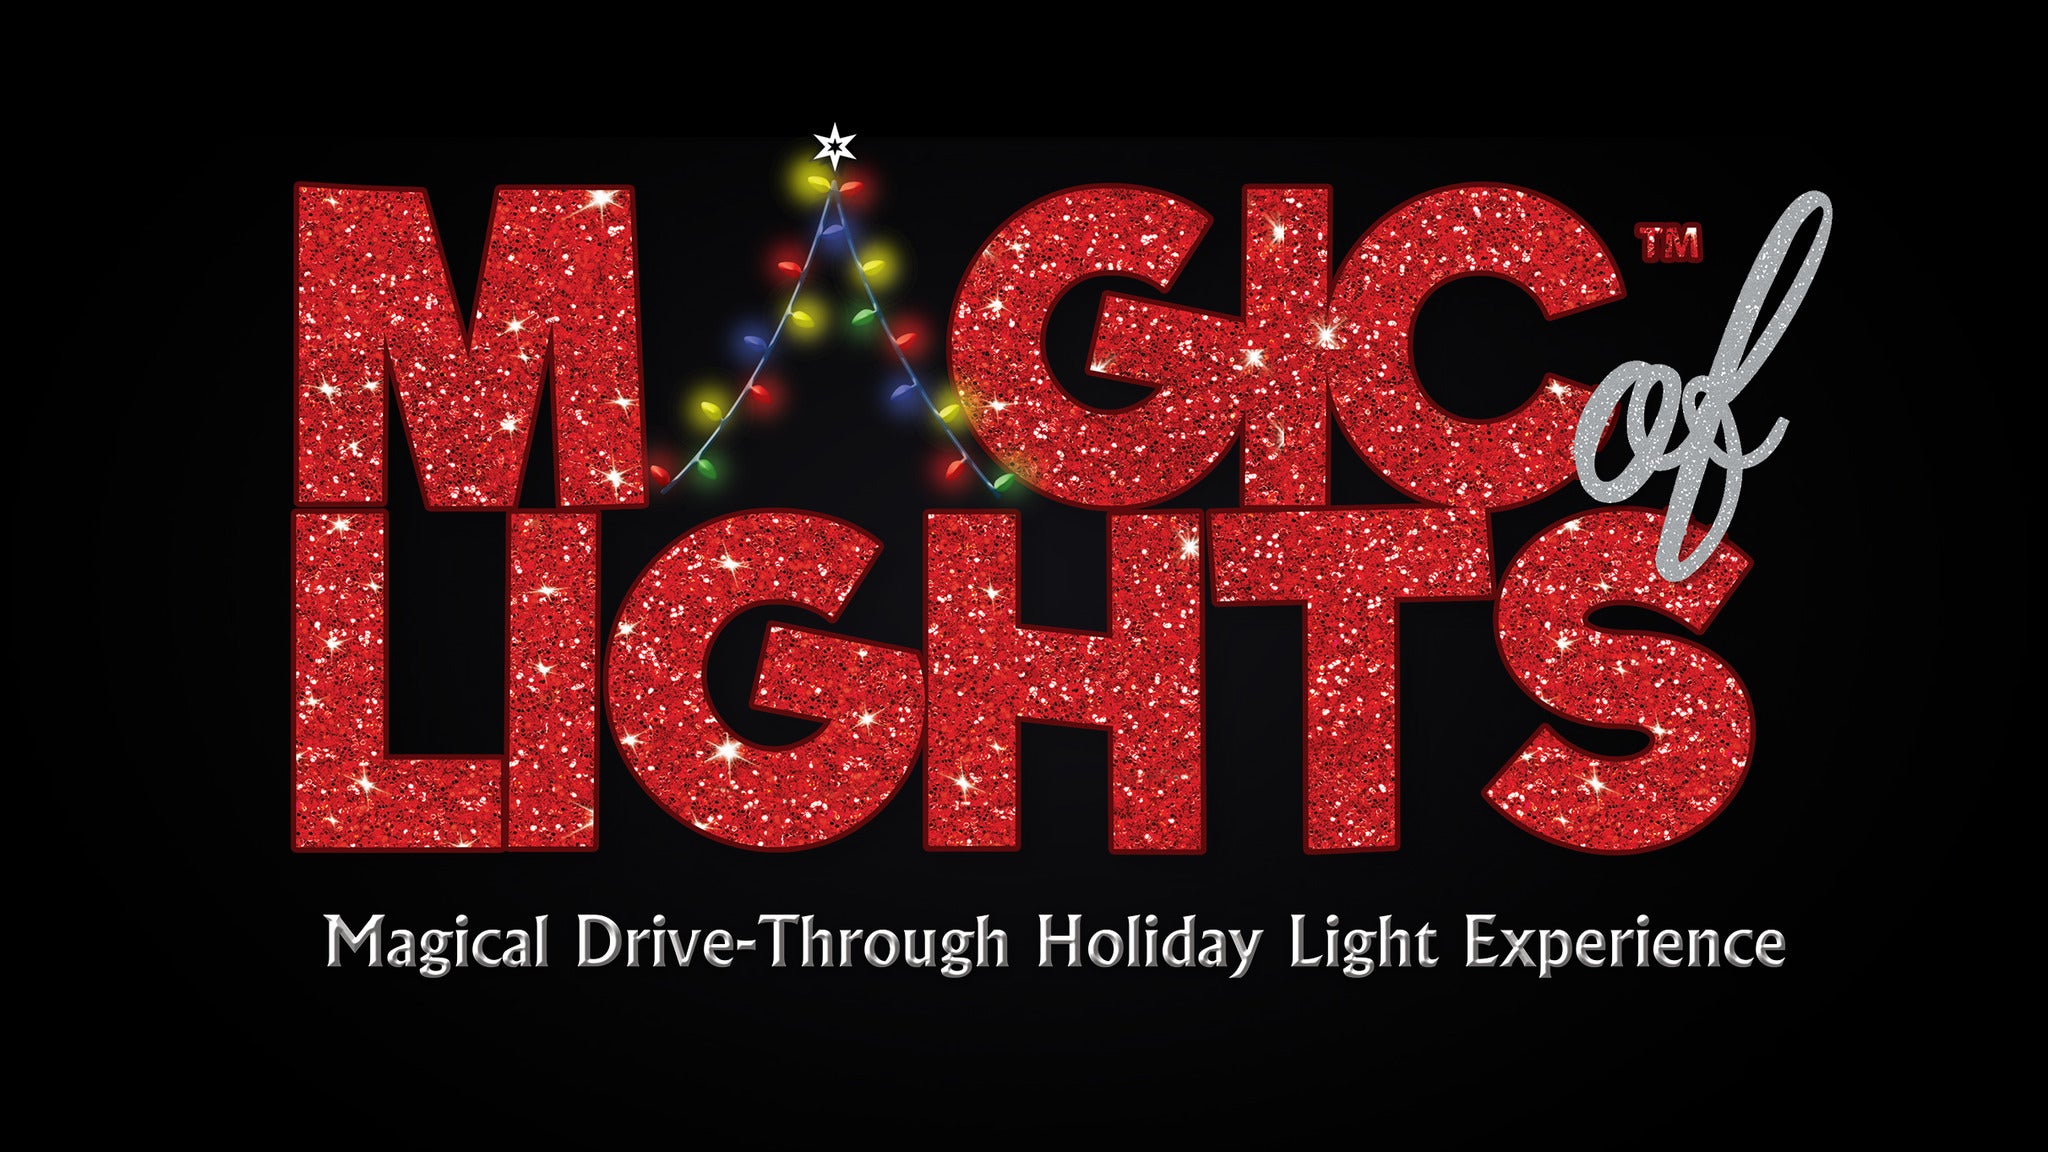 Magic Of Lights in Raleigh promo photo for Live Nation presale offer code